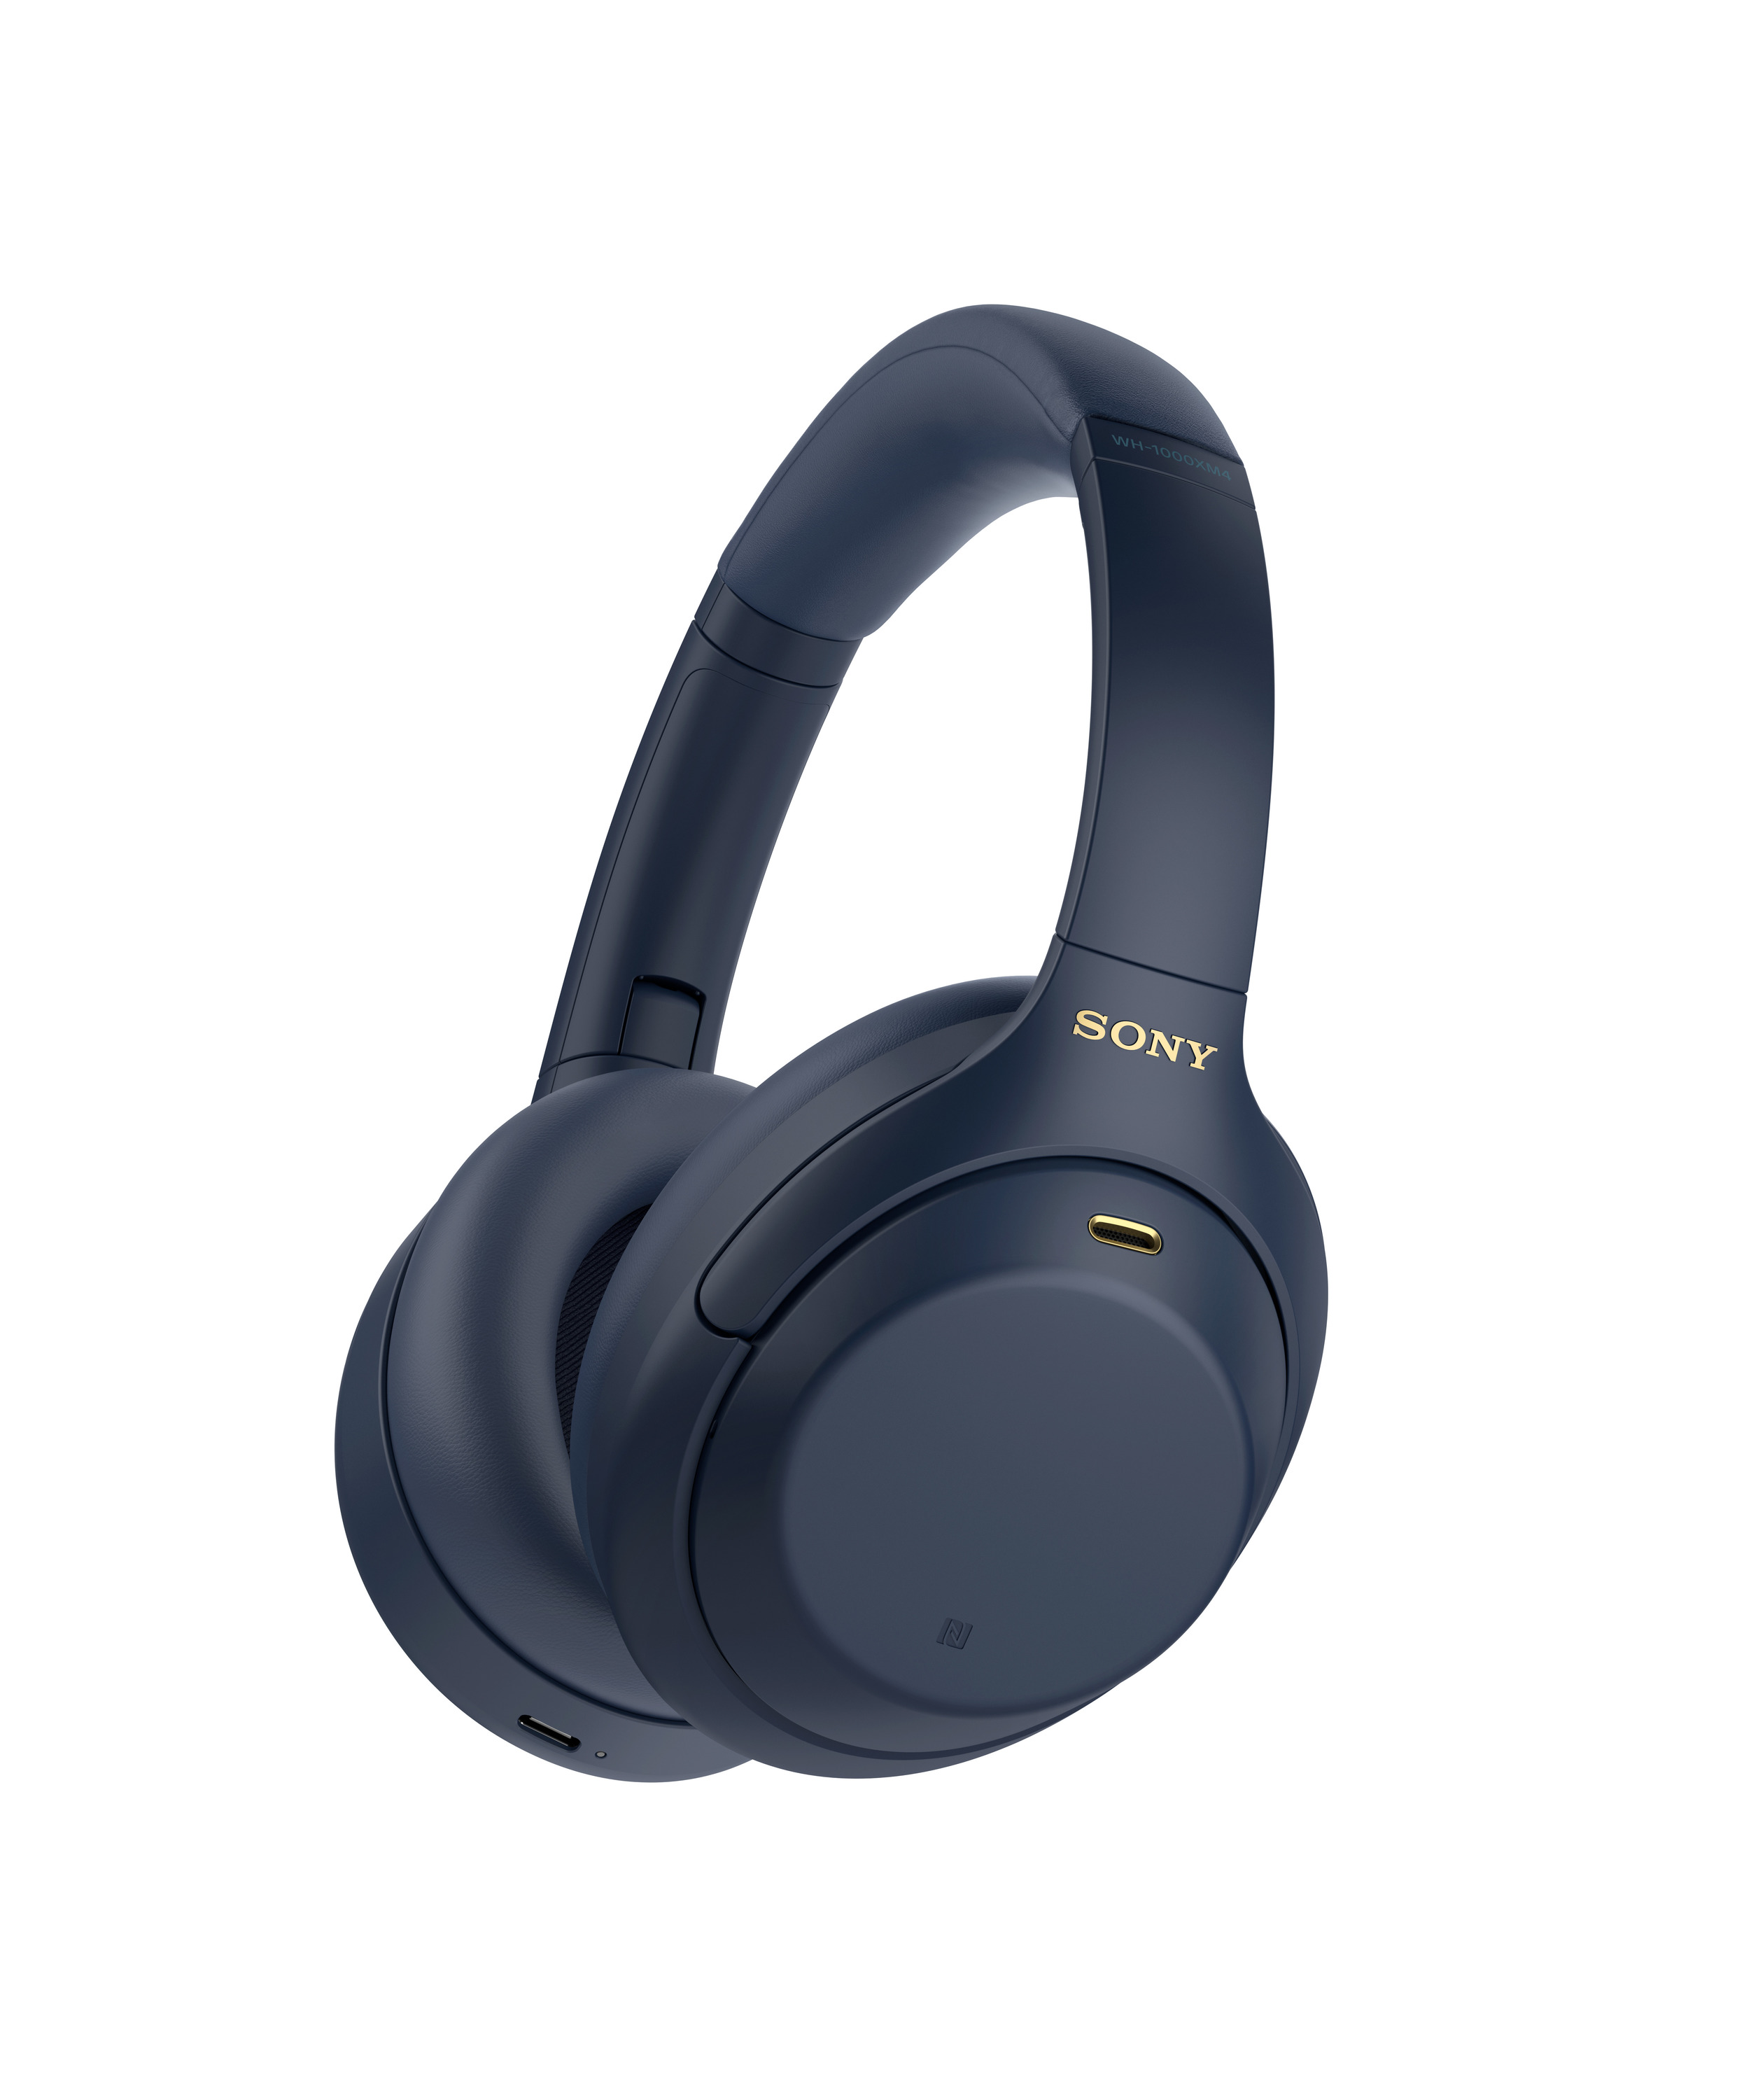 Sony refreshes the WH-1000XM4 in a Midnight Blue colourway -   News